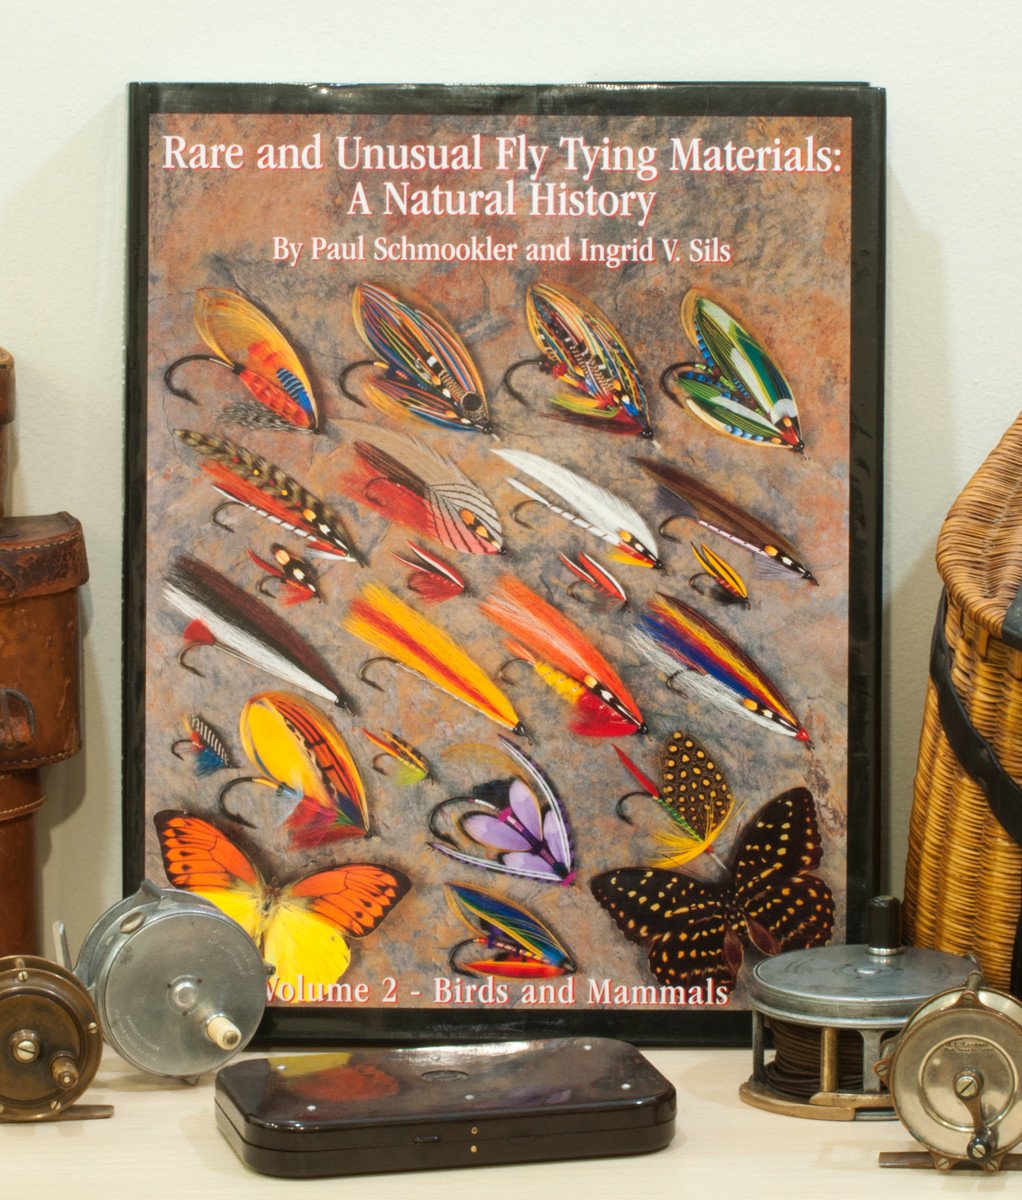 Schmookler & Sils - Rare And Unusual Fly Tying Materials: A Natural History  - Volume 2